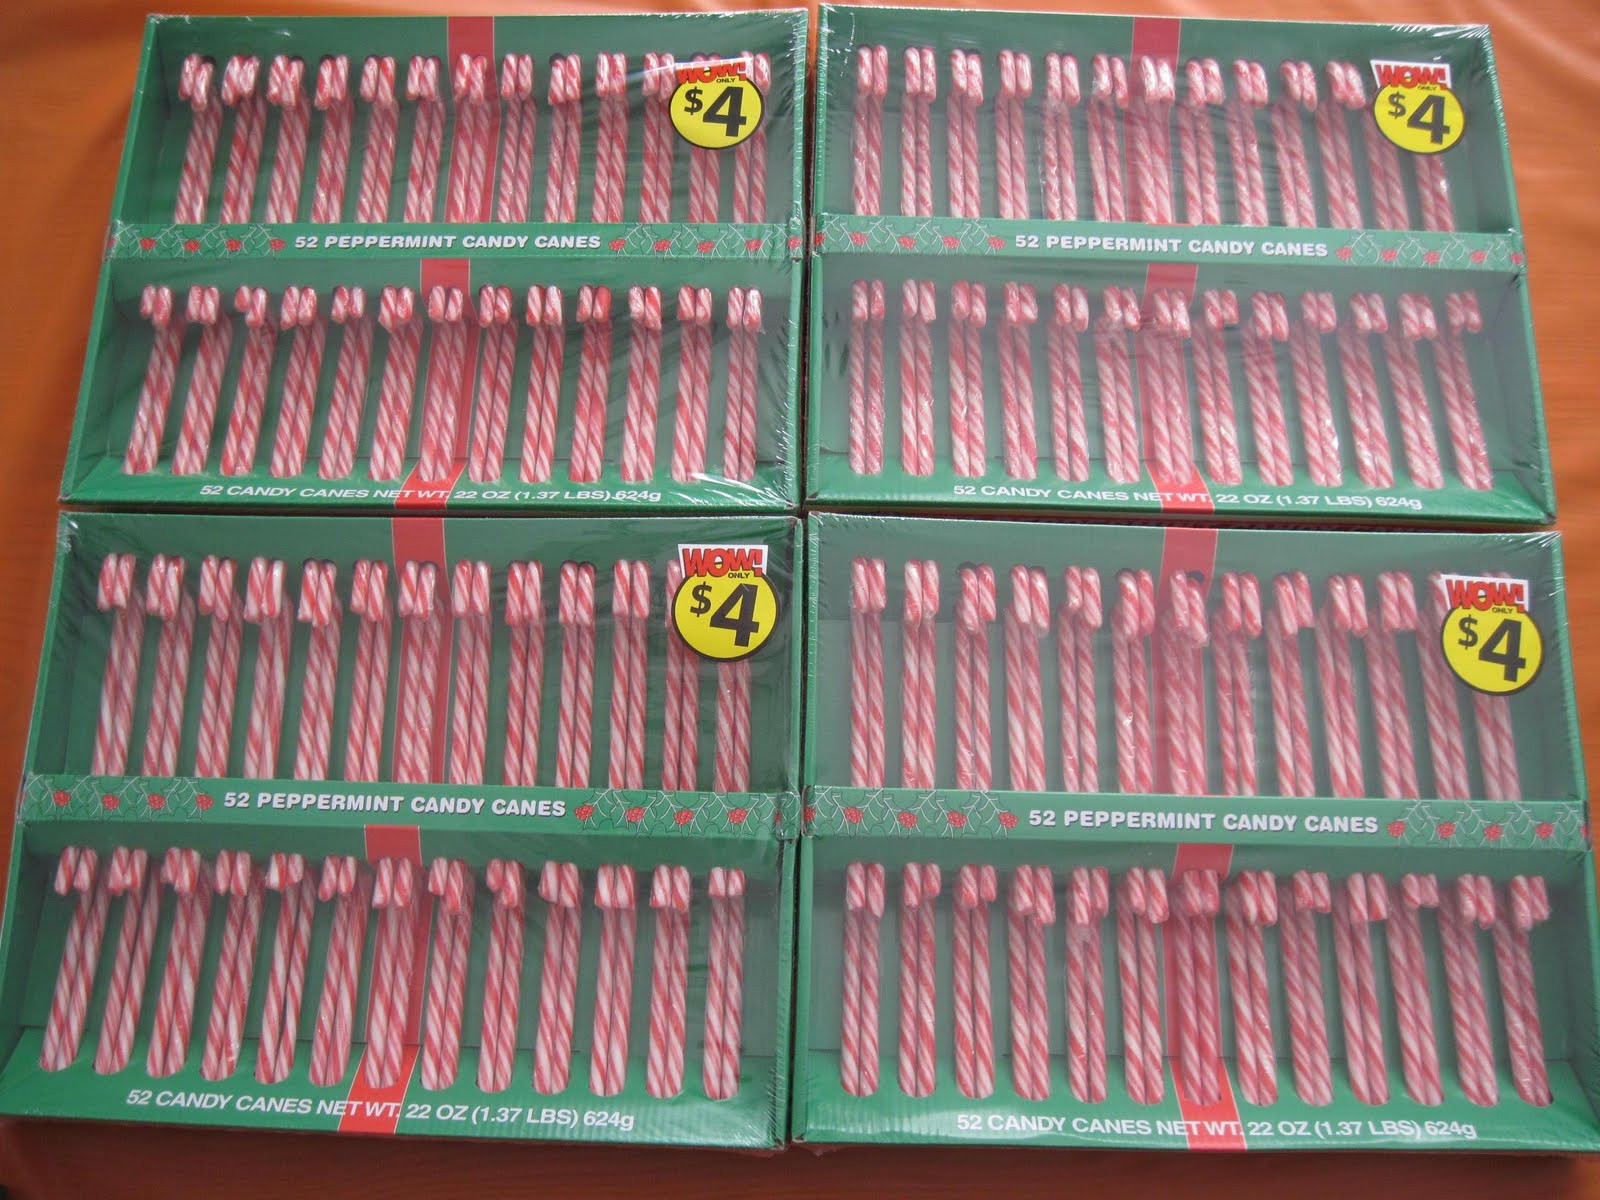 Walgreens Christmas Candy
 BEST BUY 52 Candy Canes $ 25 at Walgreens